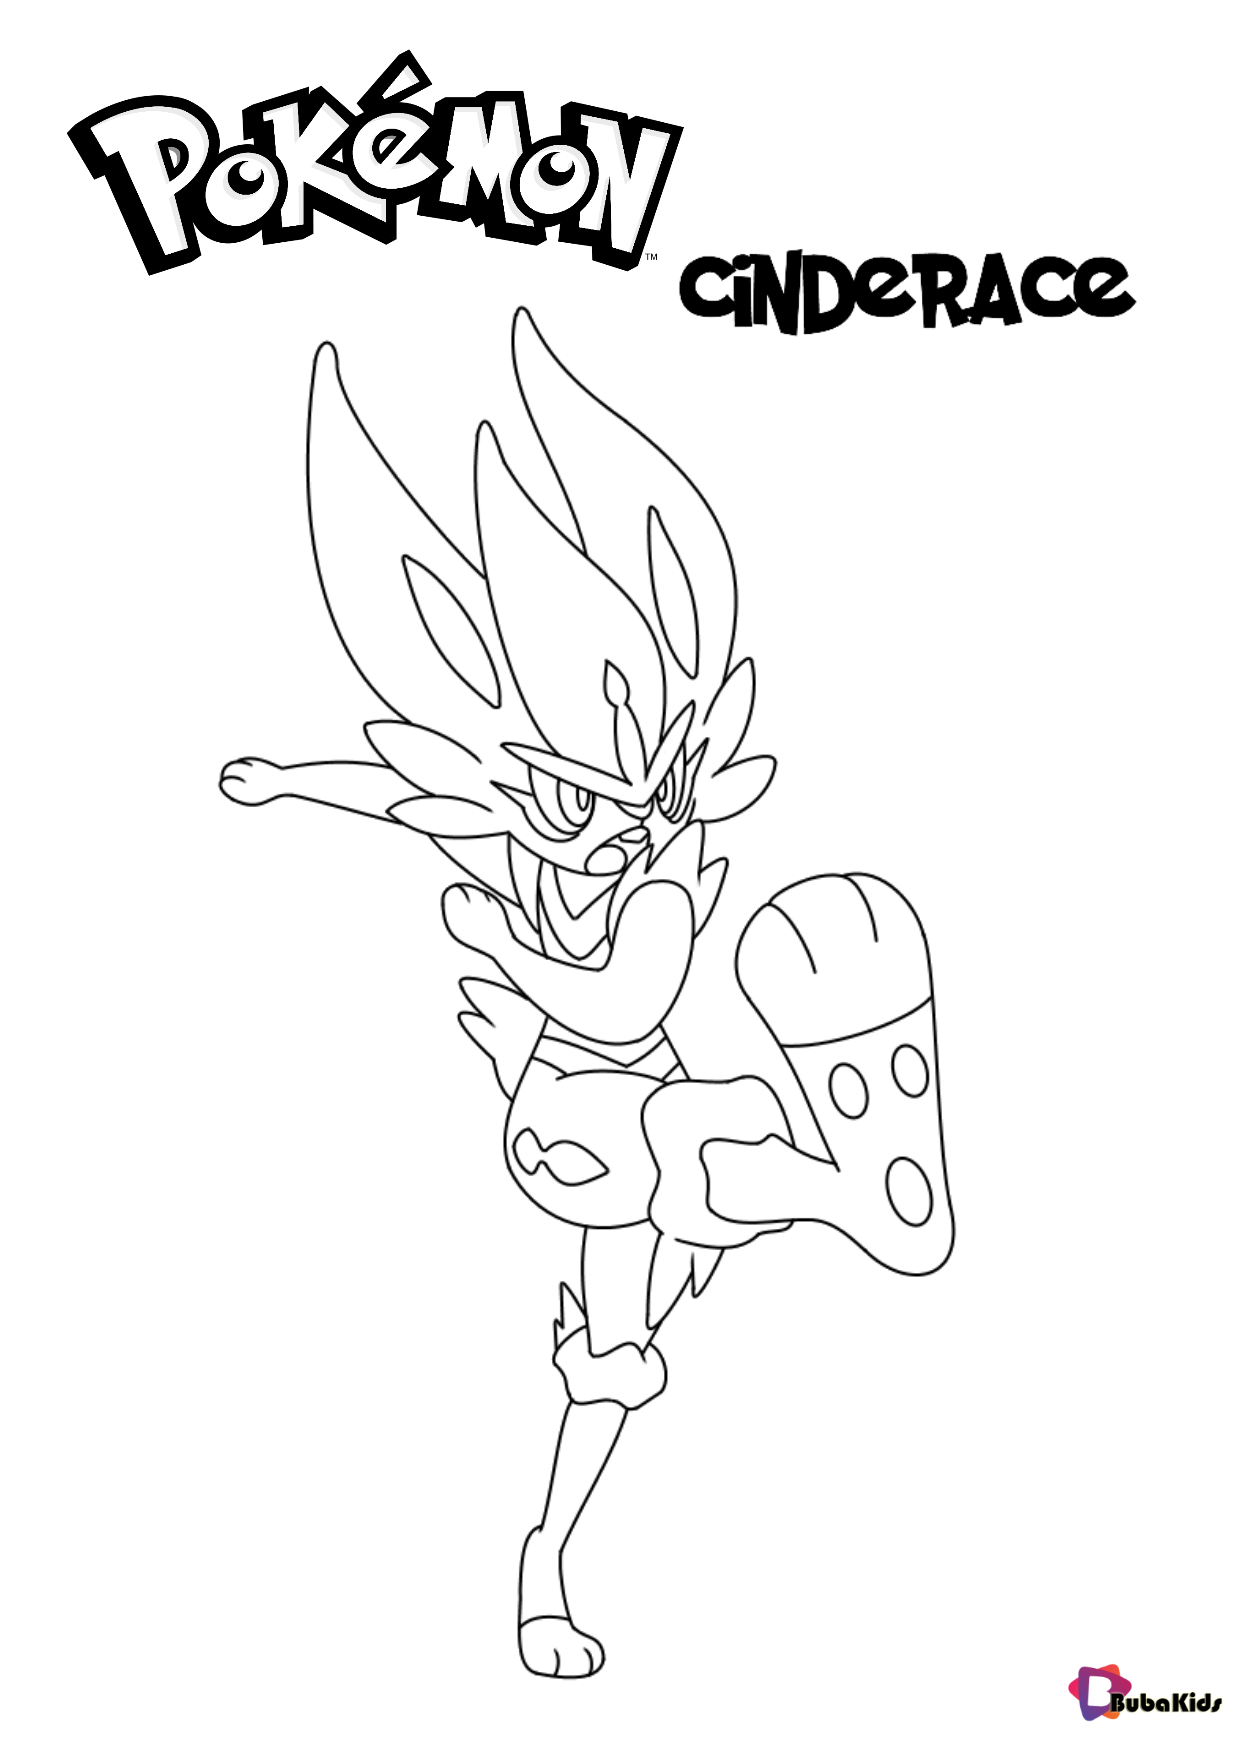 Pokemon cinderace coloring pages Wallpaper